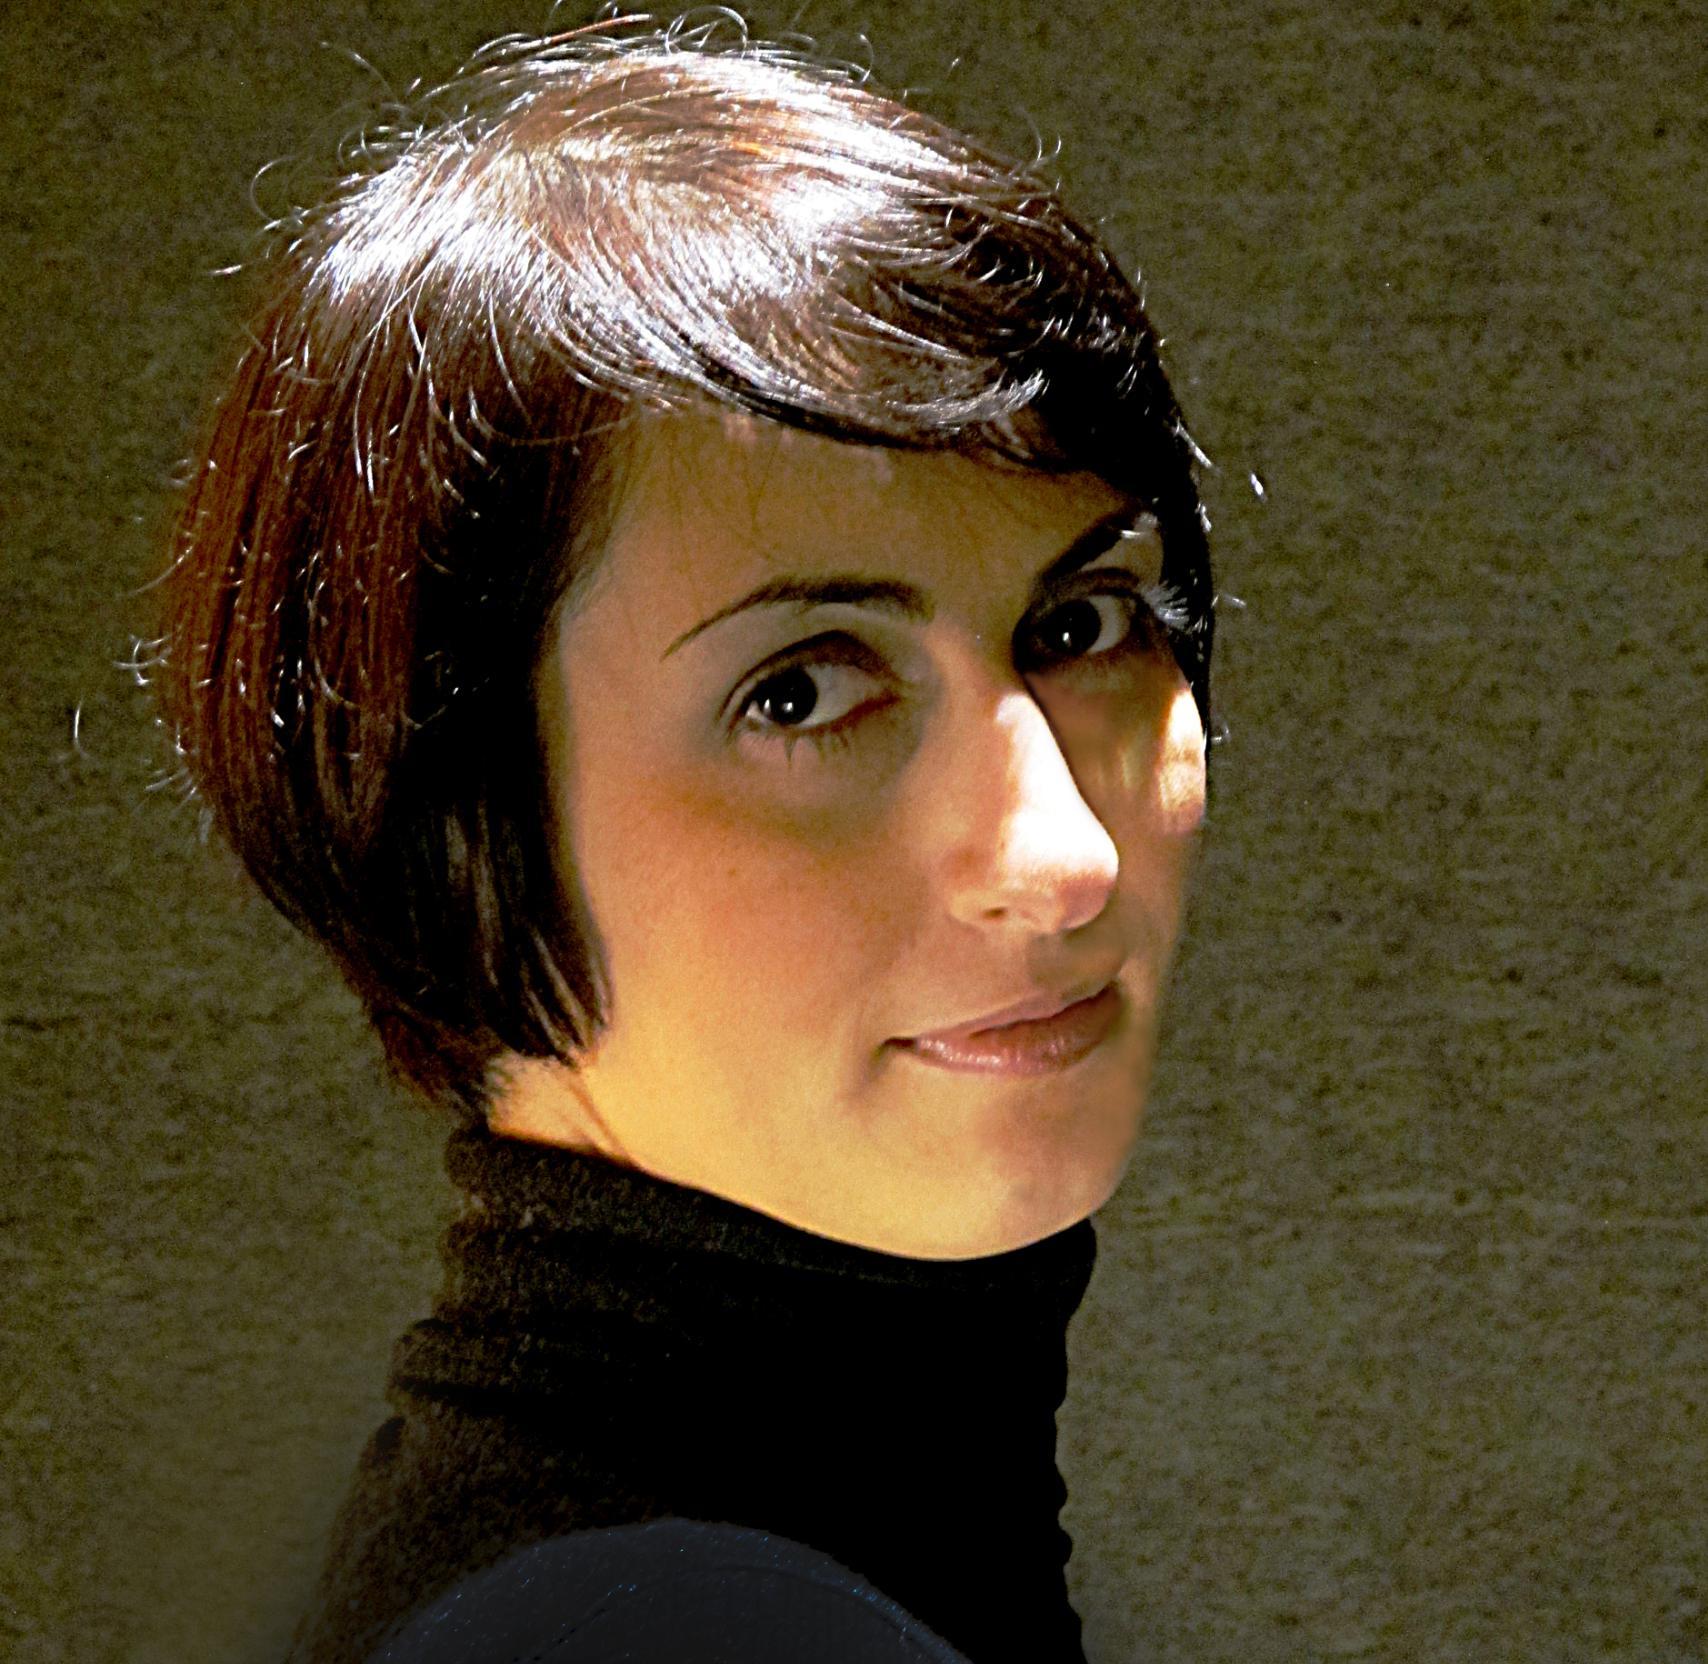 A woman in a black turtleneck sweater and with dark short hair looks at the camera.